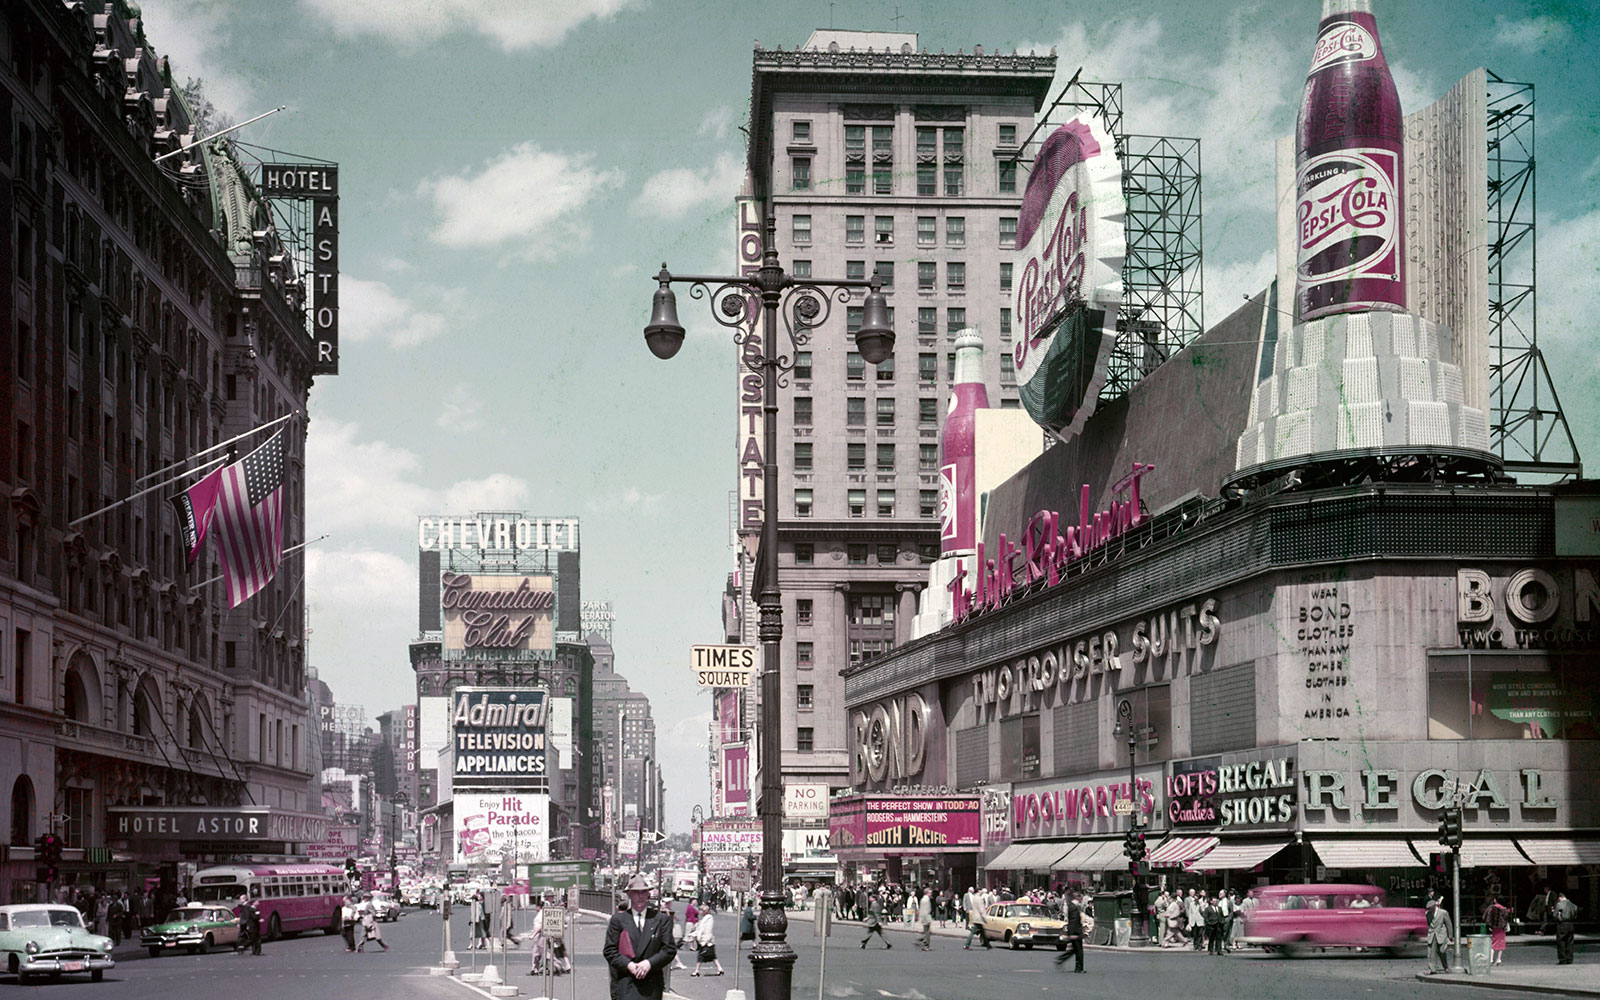 Check Out Times Square, The Brooklyn Bridge, and New York City's Sandy Beaches in the 1950s